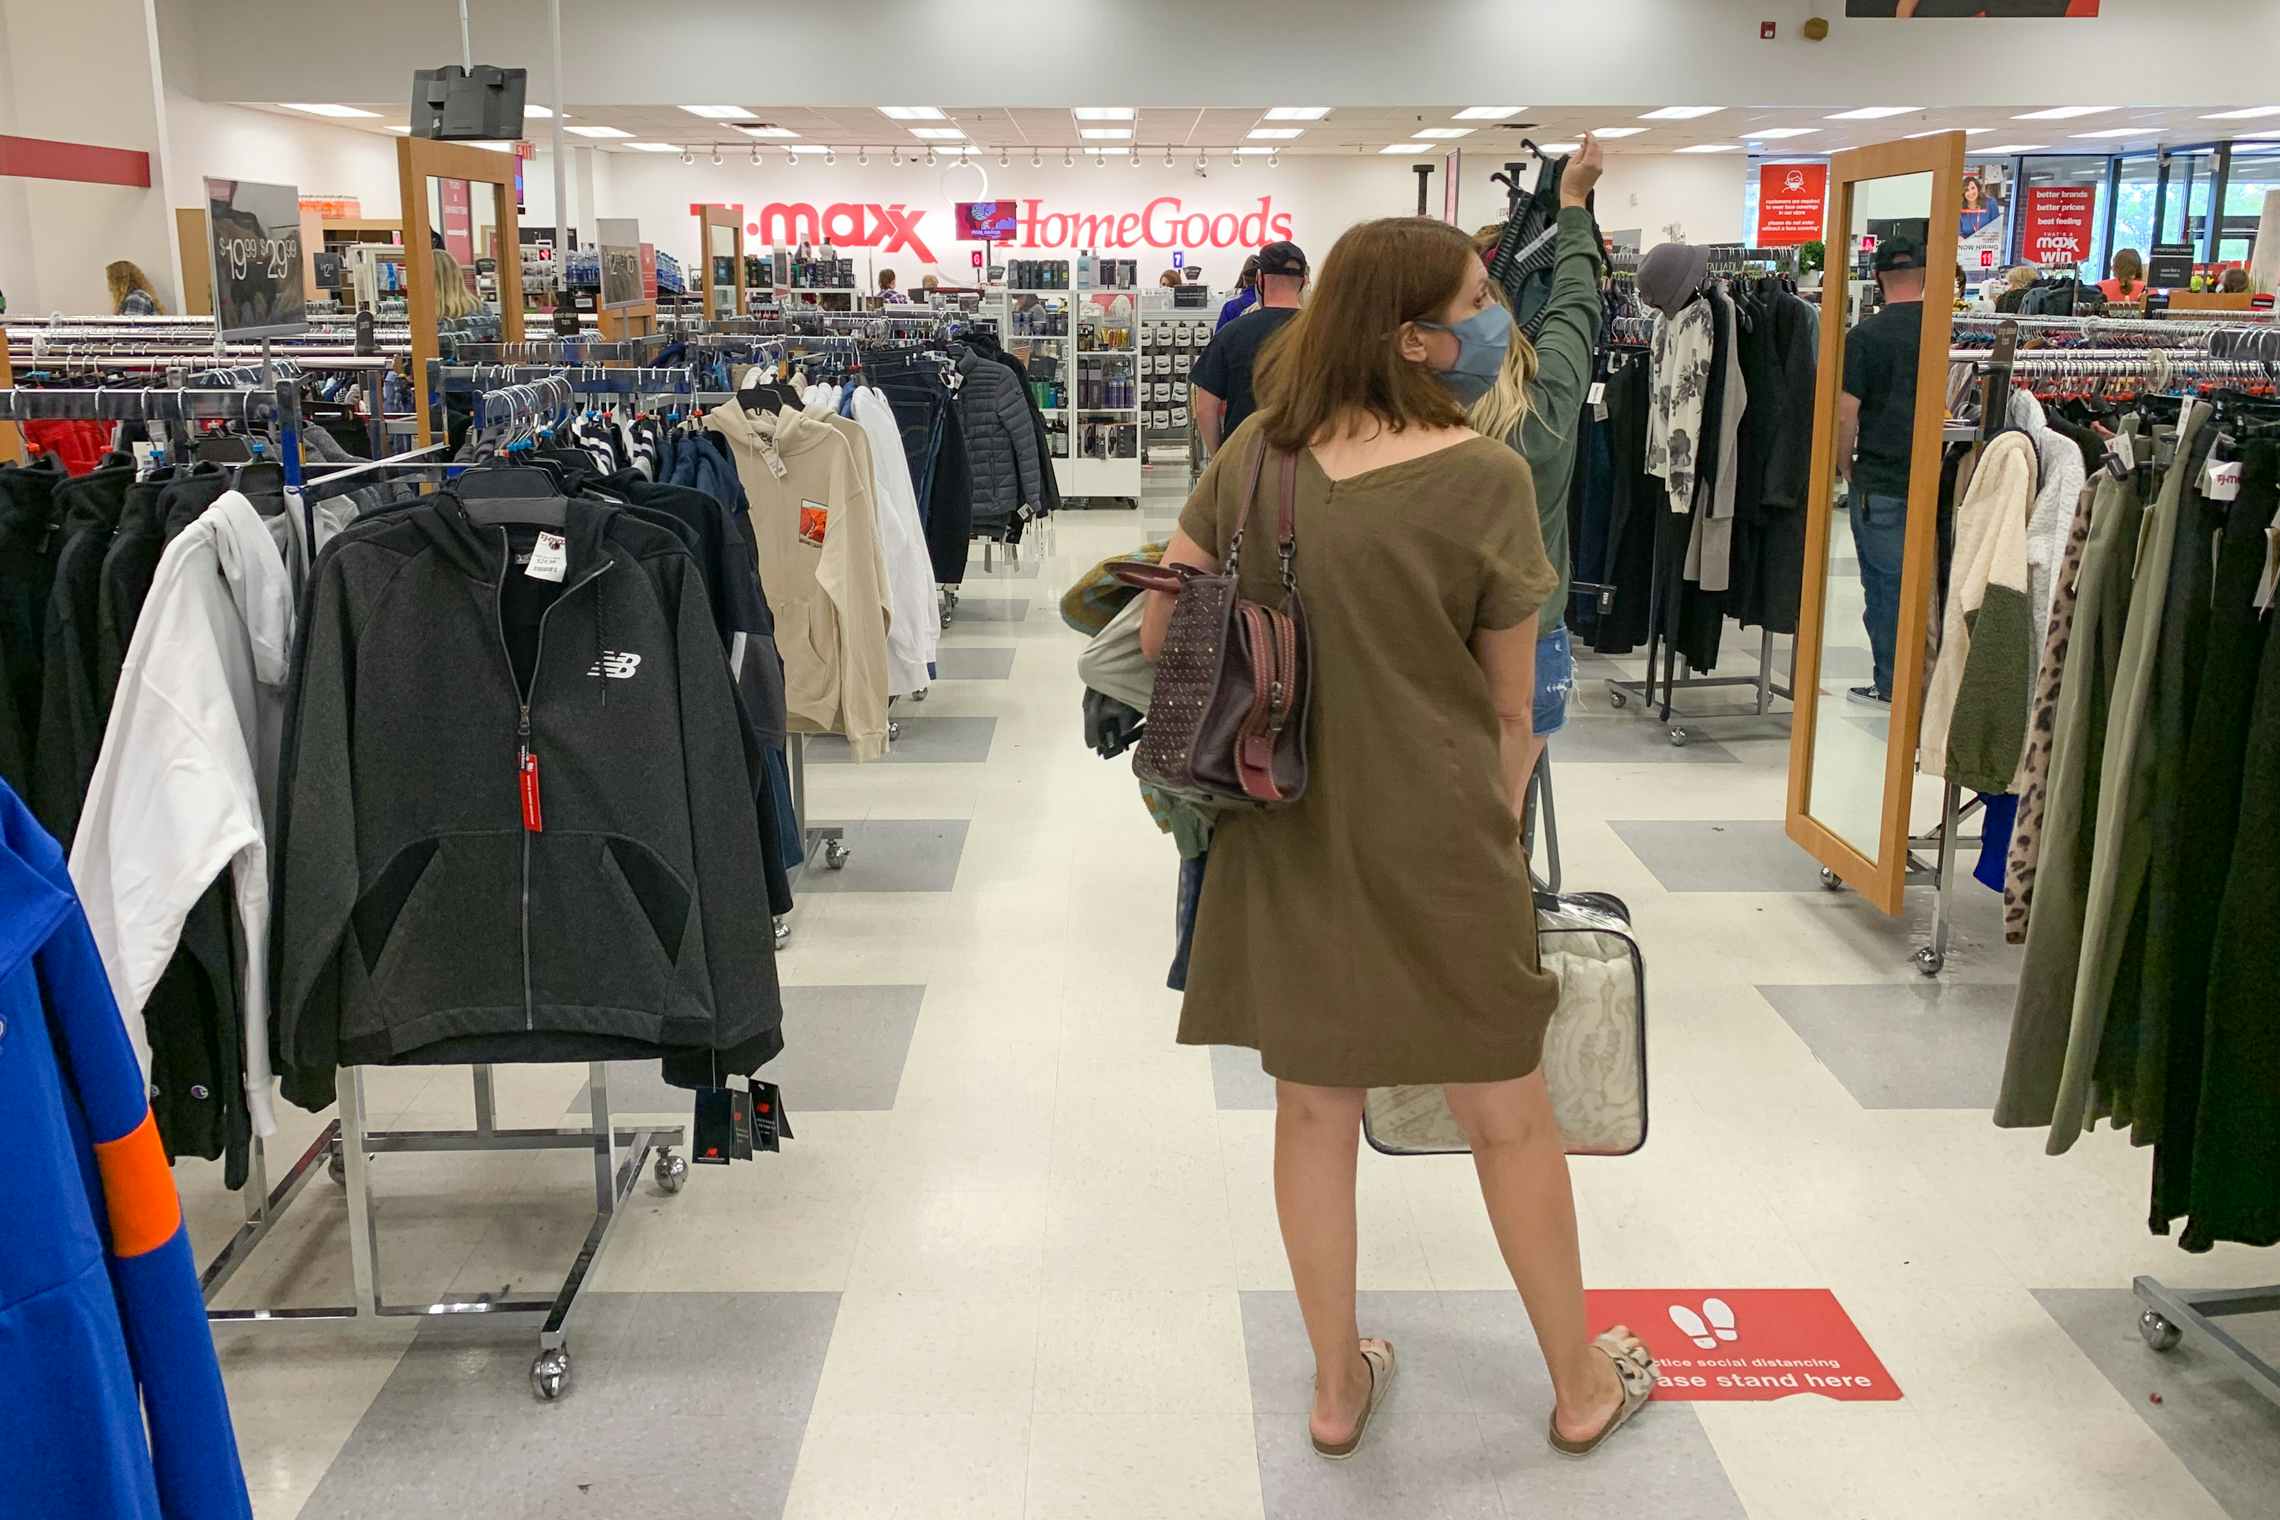 A long line of shoppers waiting in the TJ Maxx Checkout line